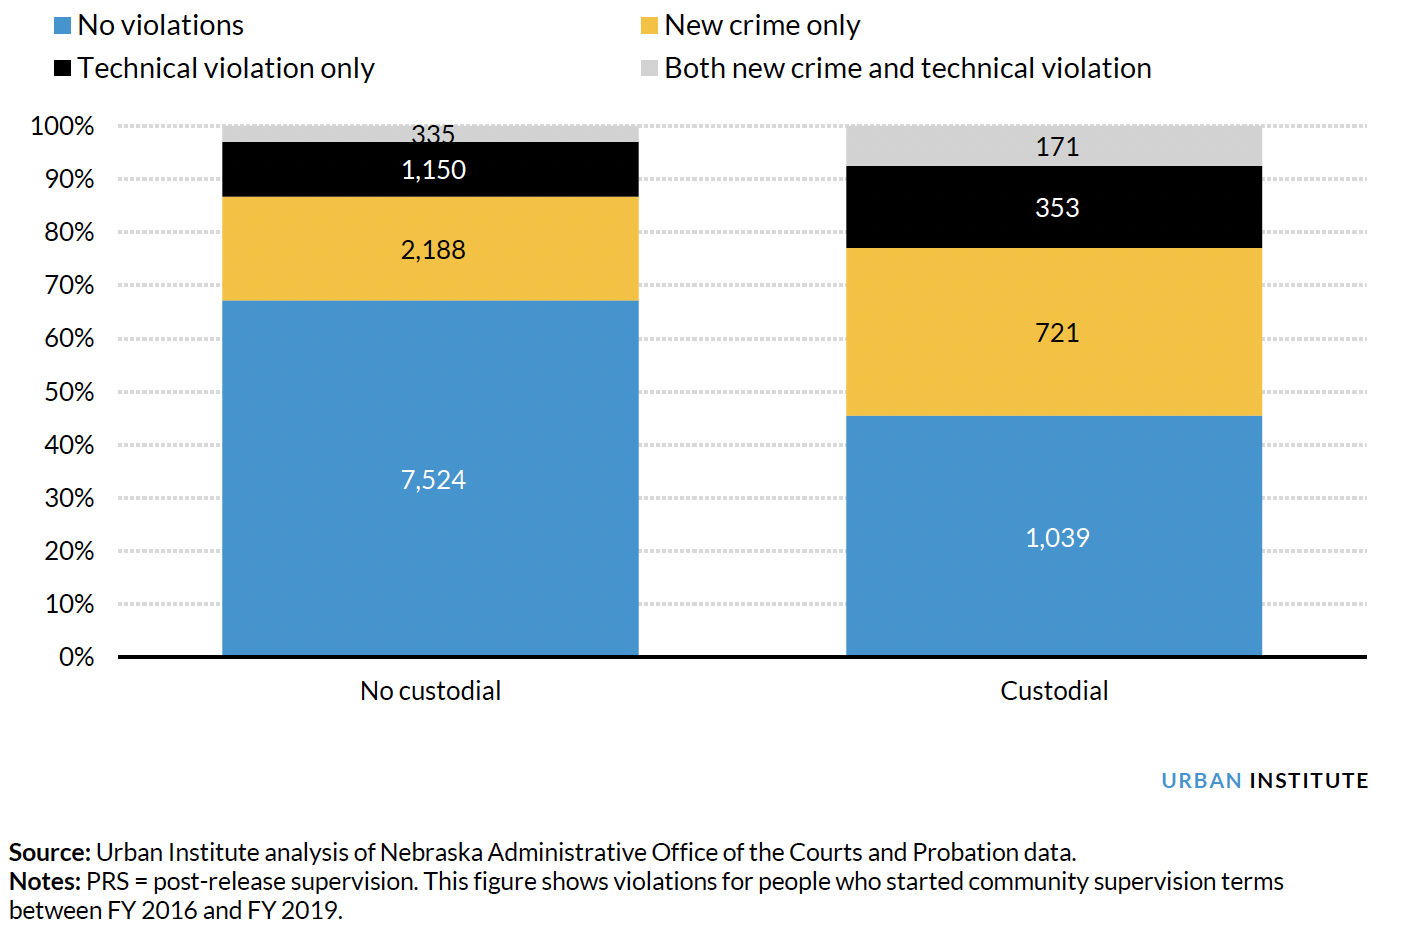 Illustrating Violation Types among People on Felony Probation or PRS in Nebraska Who Did and Did Not Receive Custodial Sanctions, FY 2016–19 